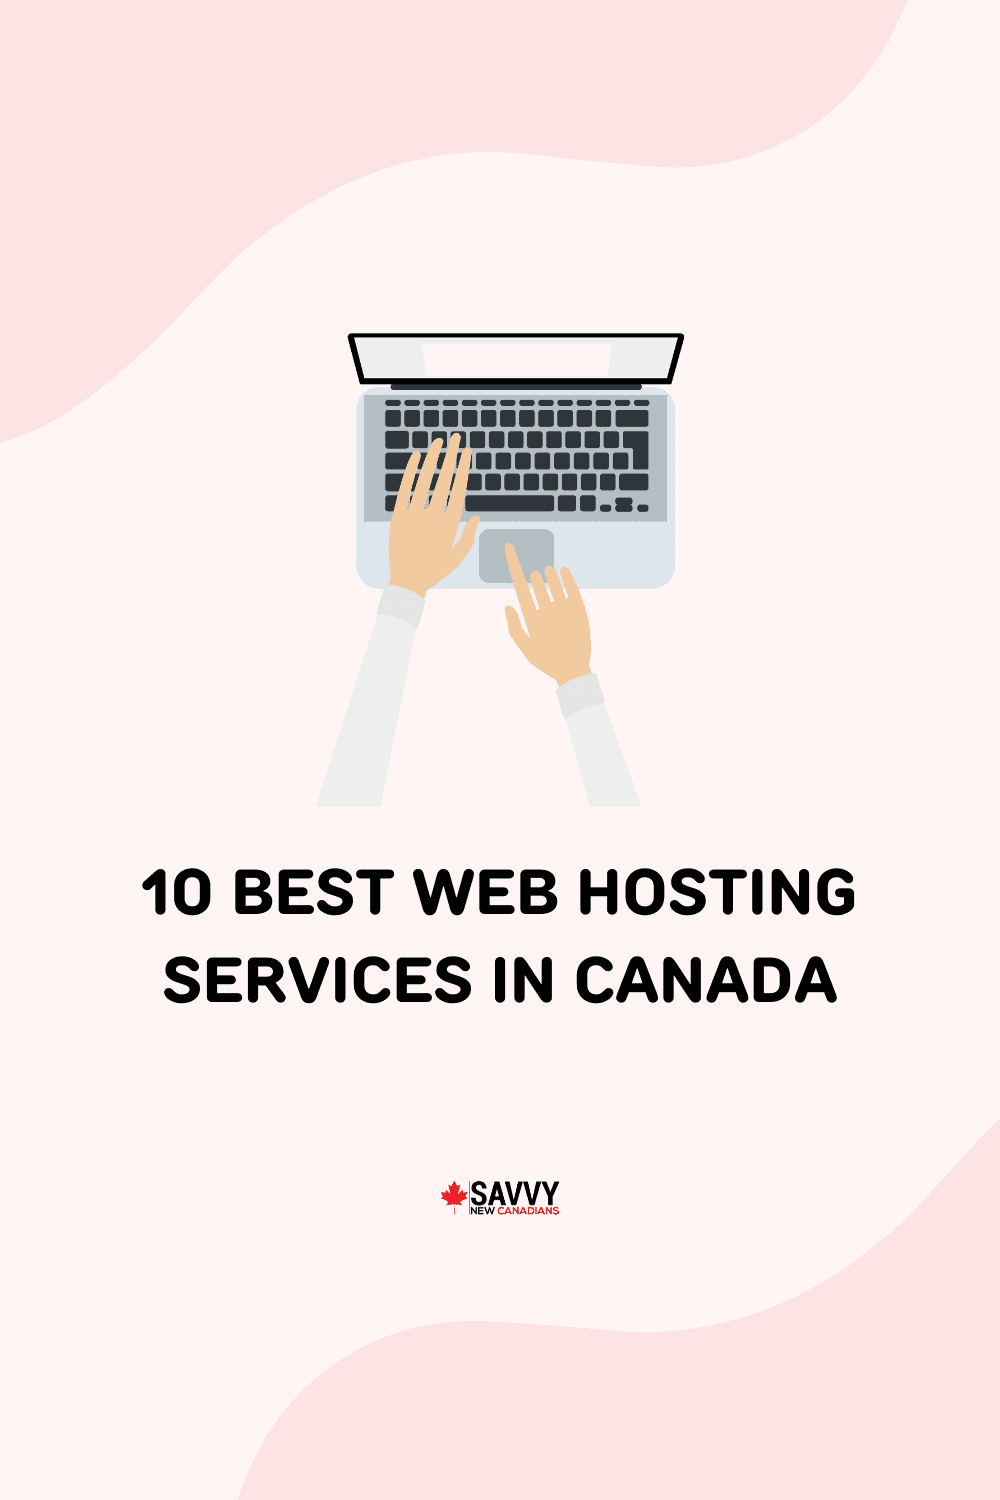 10 Best Web Hosting Services in Canada 2022: Cheap Hosting For Websites